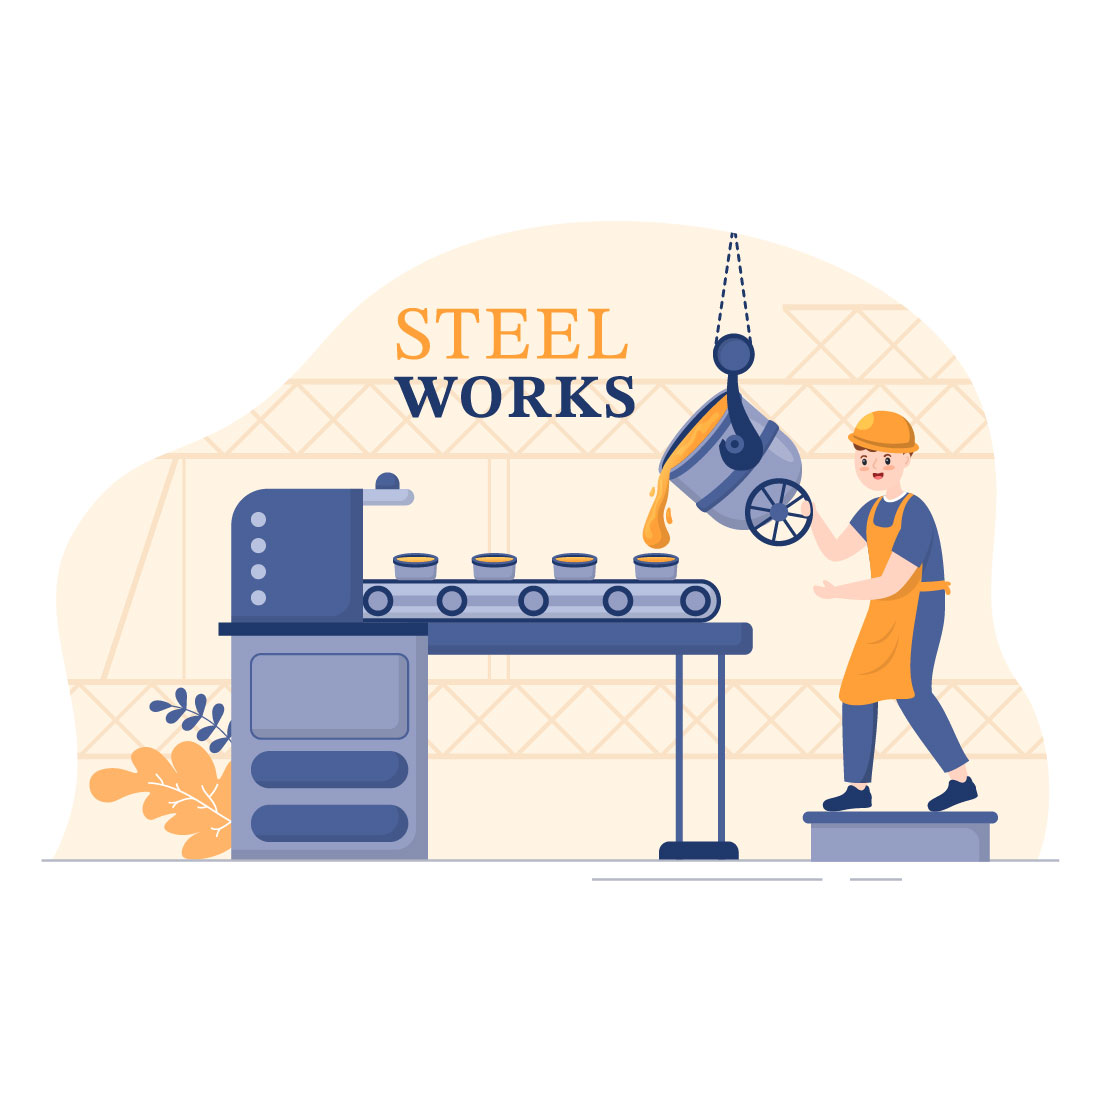 Steelworks and Hot Steel Pouring Illustration cover image.